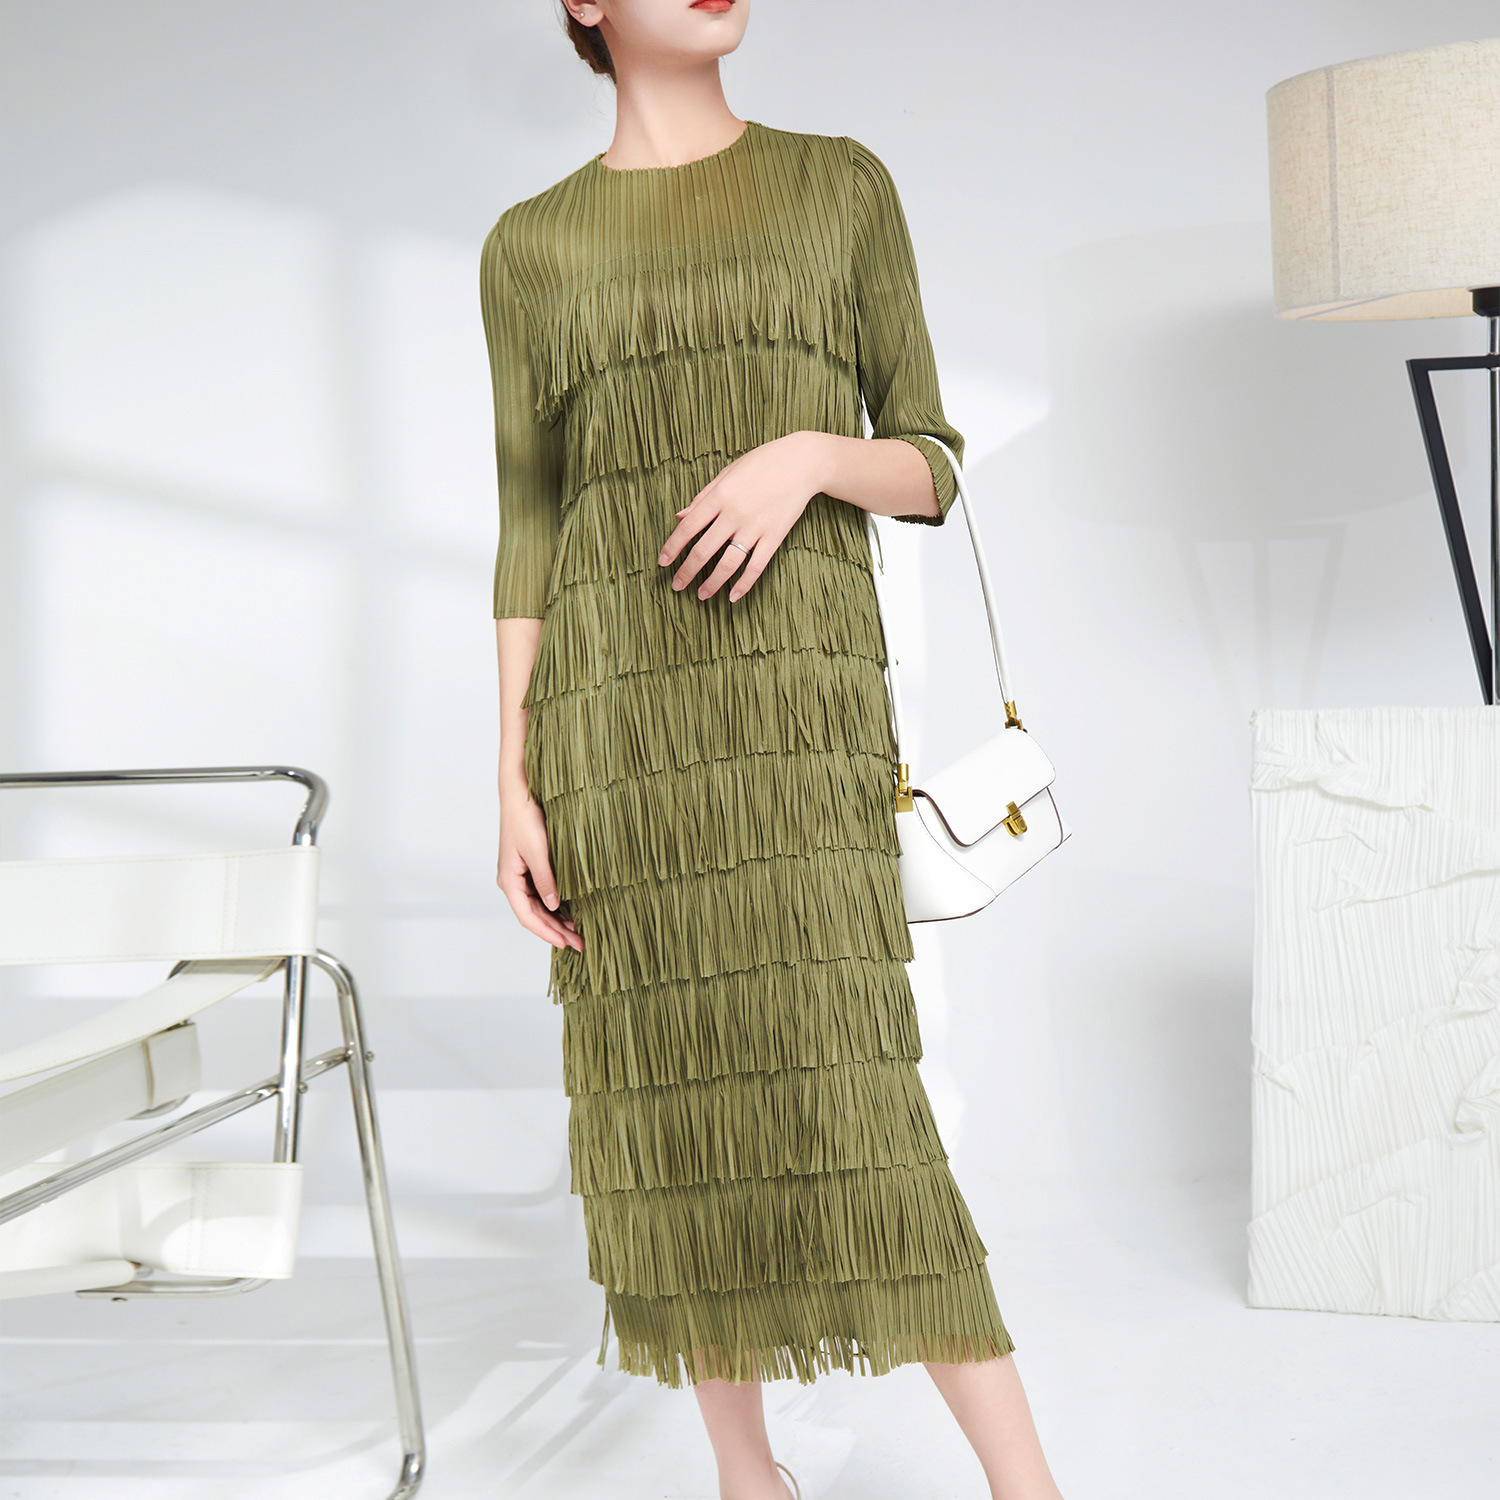 Embrace Contemporary Chic lady's fashion Fashion Dresses Timeless beauty in every dress silhouette